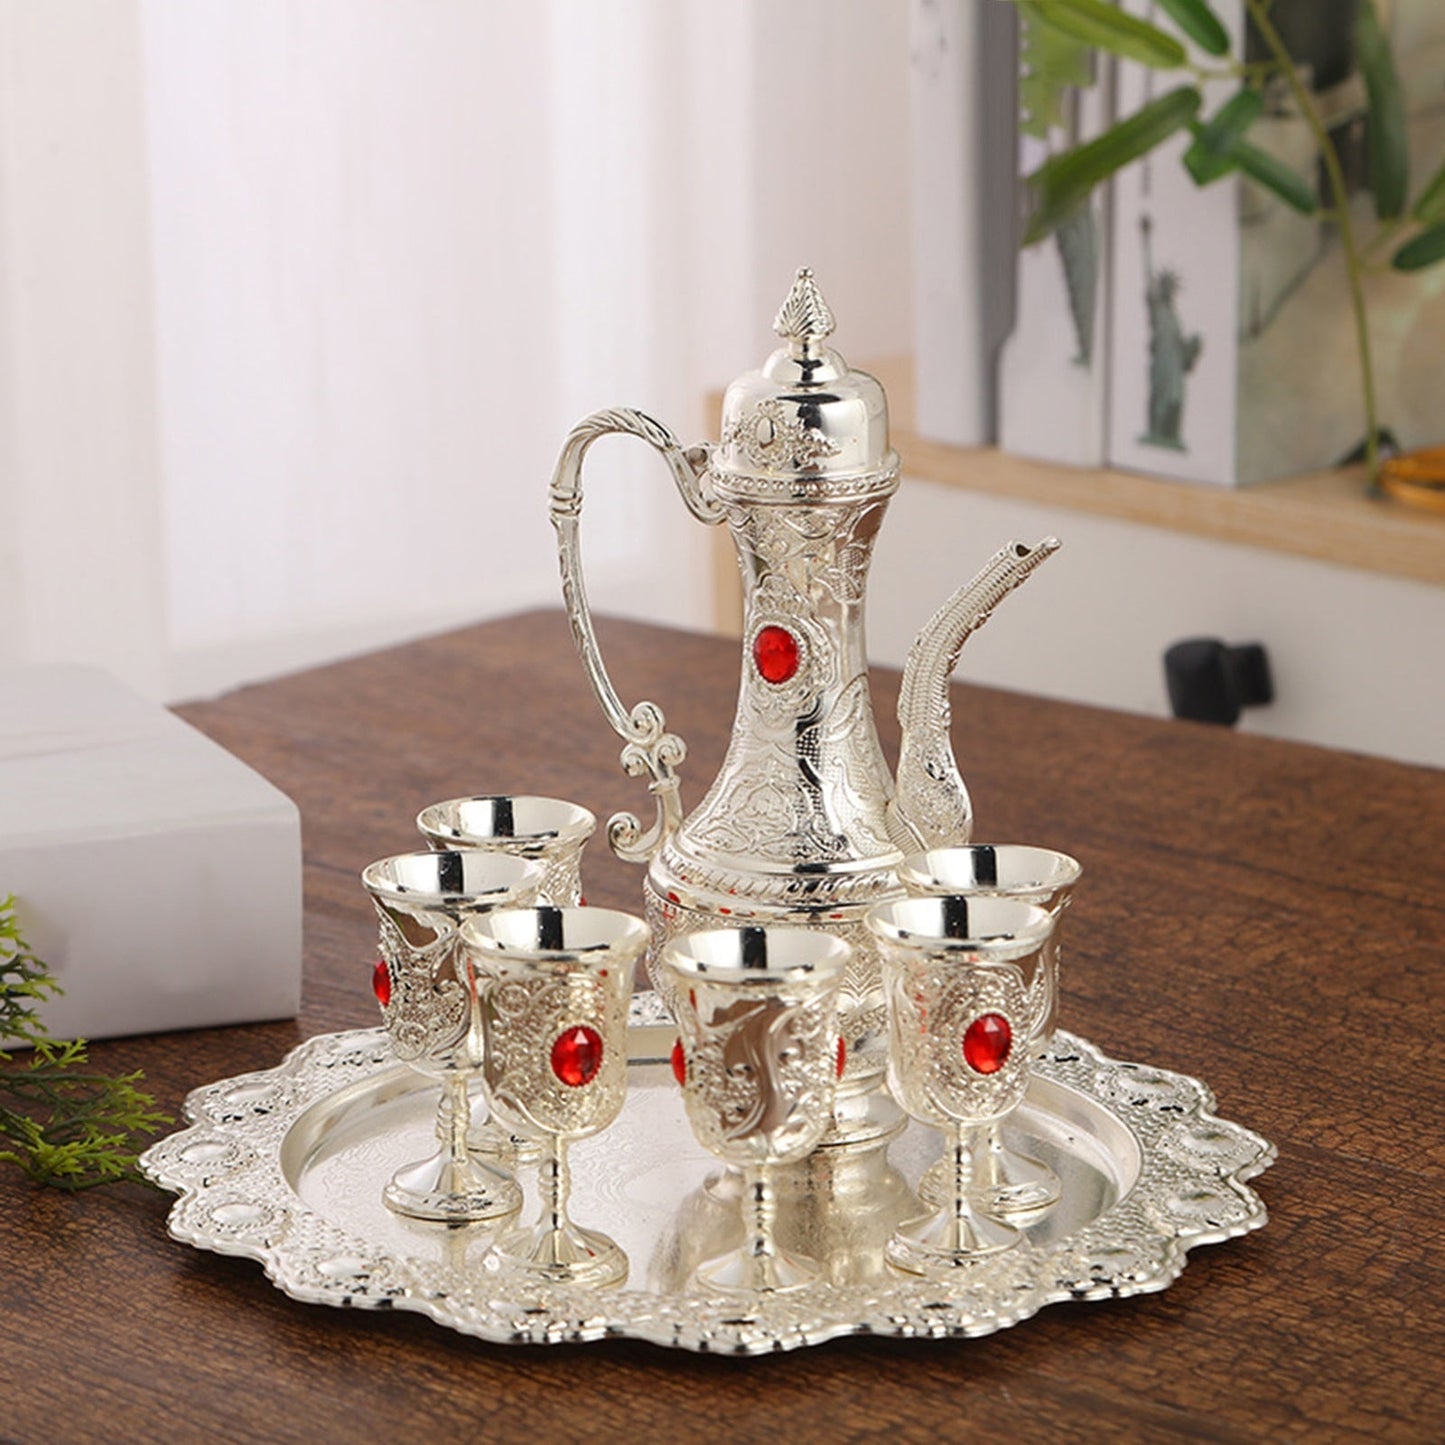 Luxury Vintage Turkish Coffee Pot Set Tea Set Decorations with 6 Cups Tray Teapot Flagon for Coffee Pot Home Decor Wedding Gift